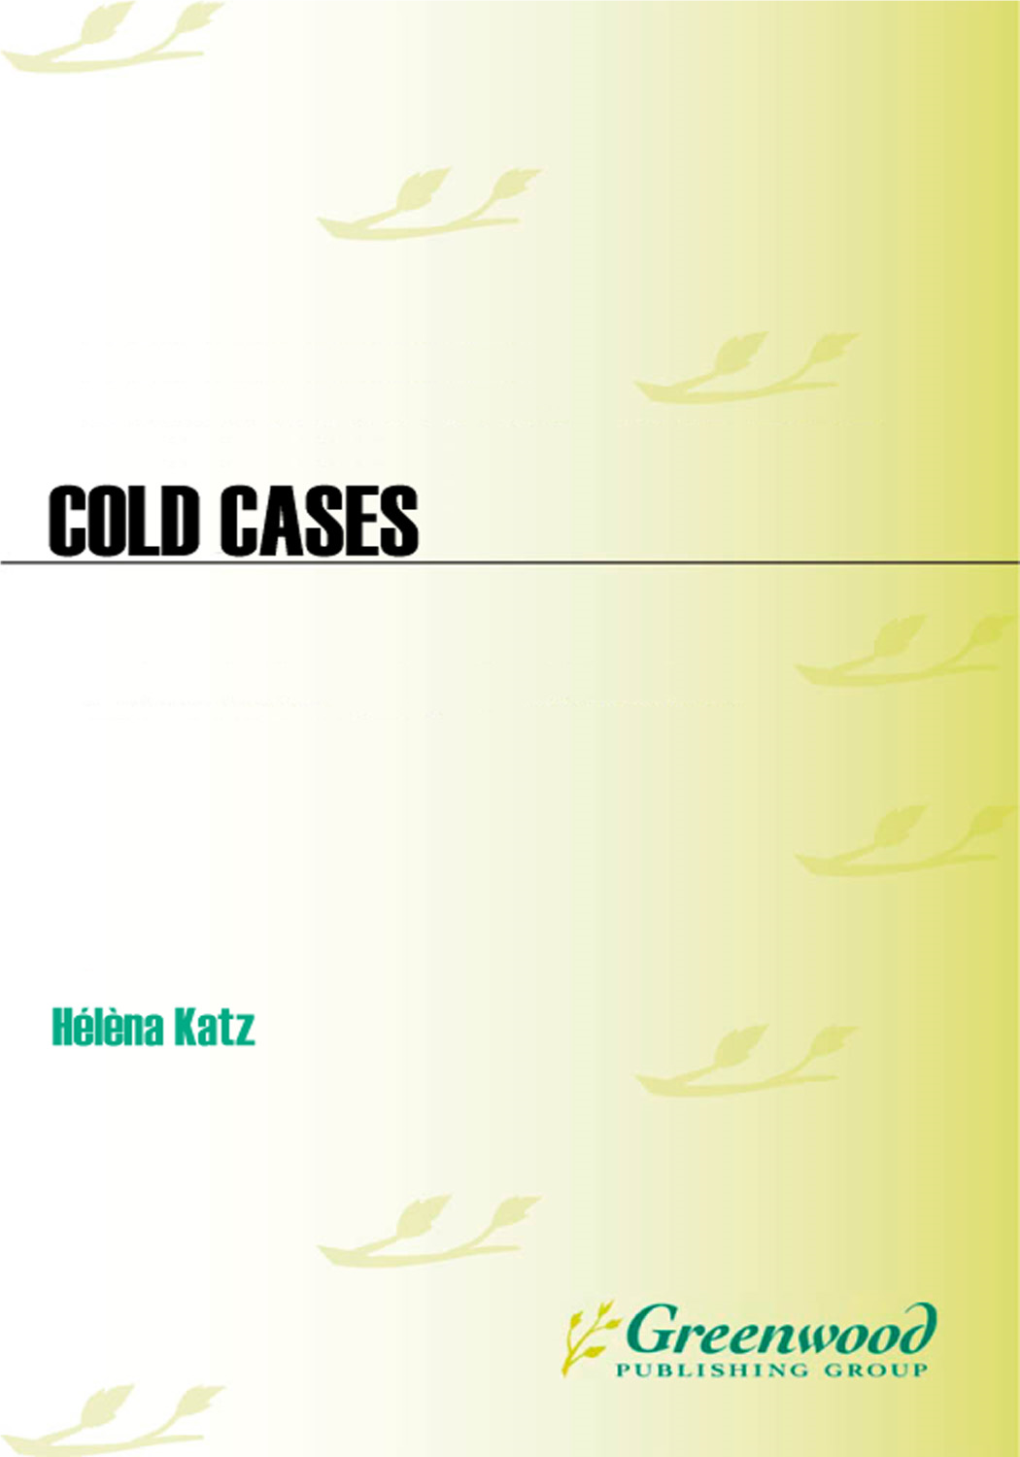 Cold Cases: Famous Unsolved Mysteries, Crimes, and Disappearances in America